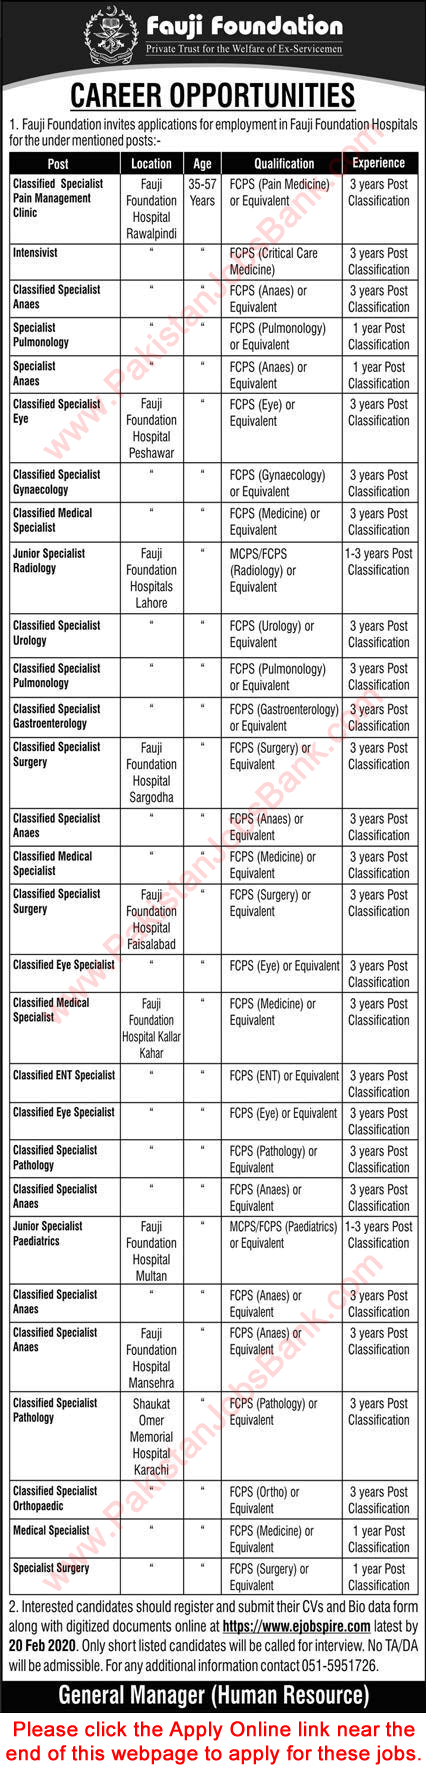 Fauji Foundation Hospitals Jobs February 2020 Apply Online Classified / Specialists Doctors Latest